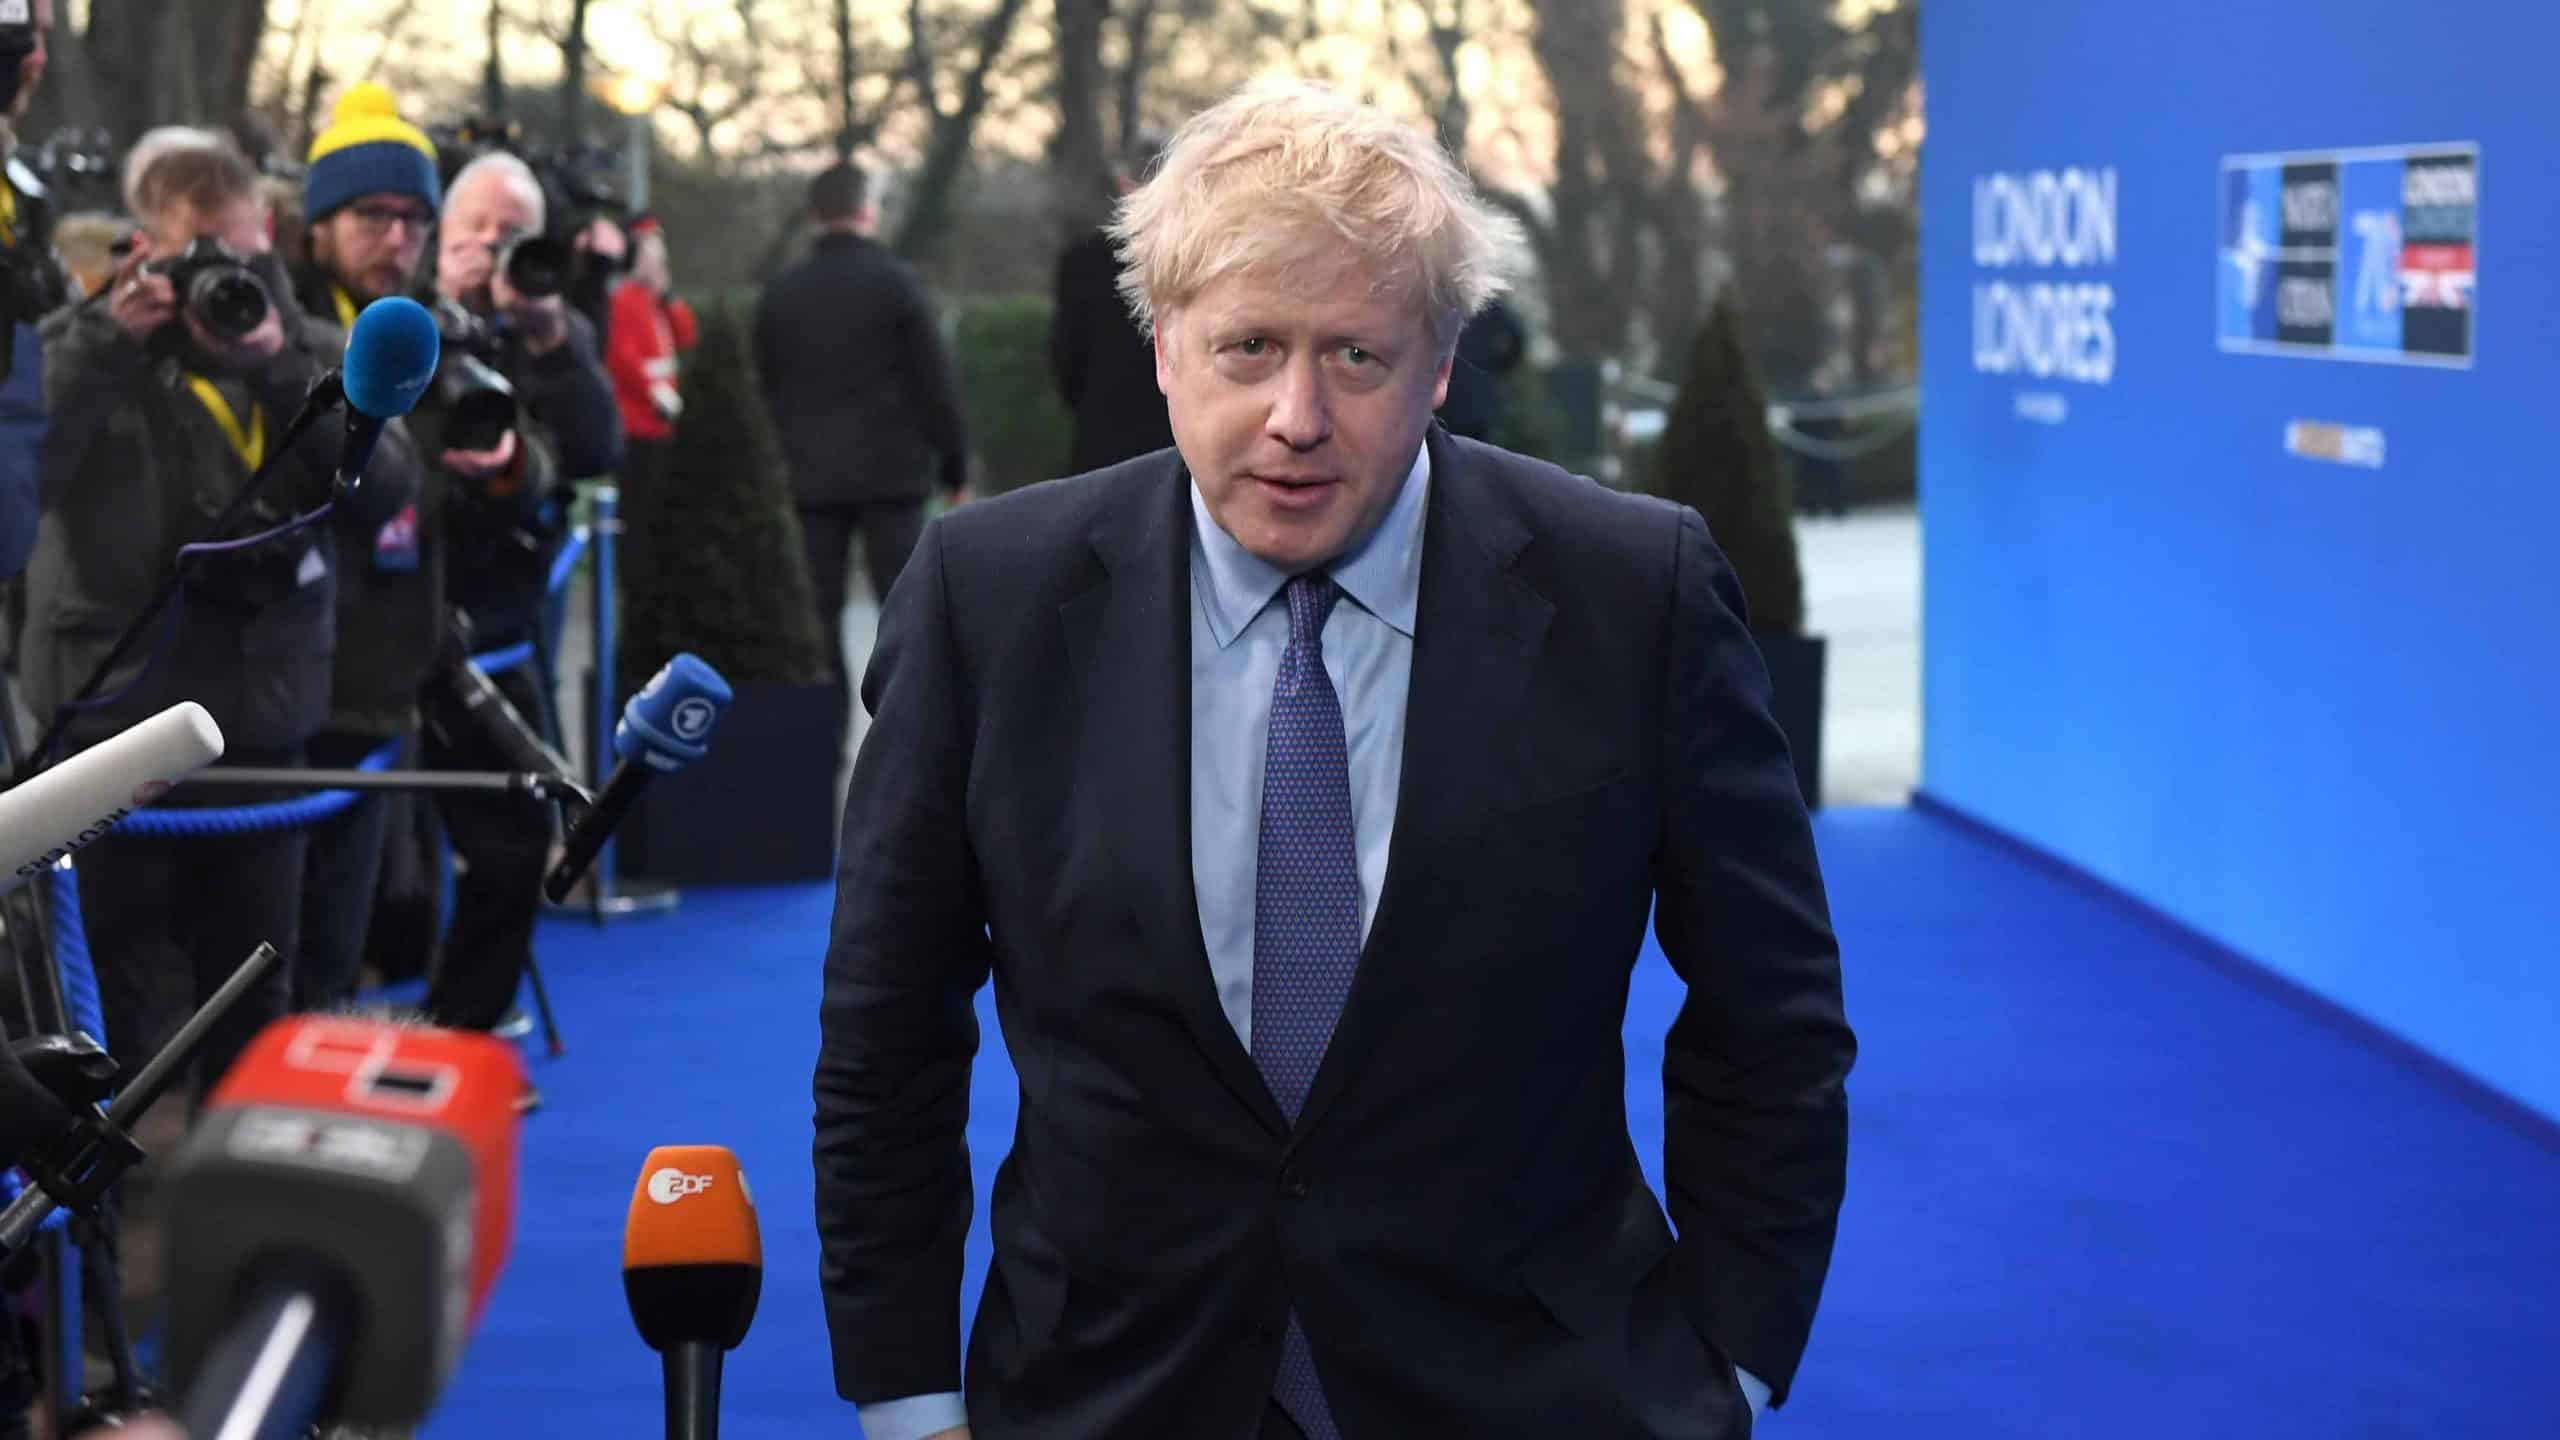 Boris Johnson backs out of another BBC interview – with all other six leaders signed up